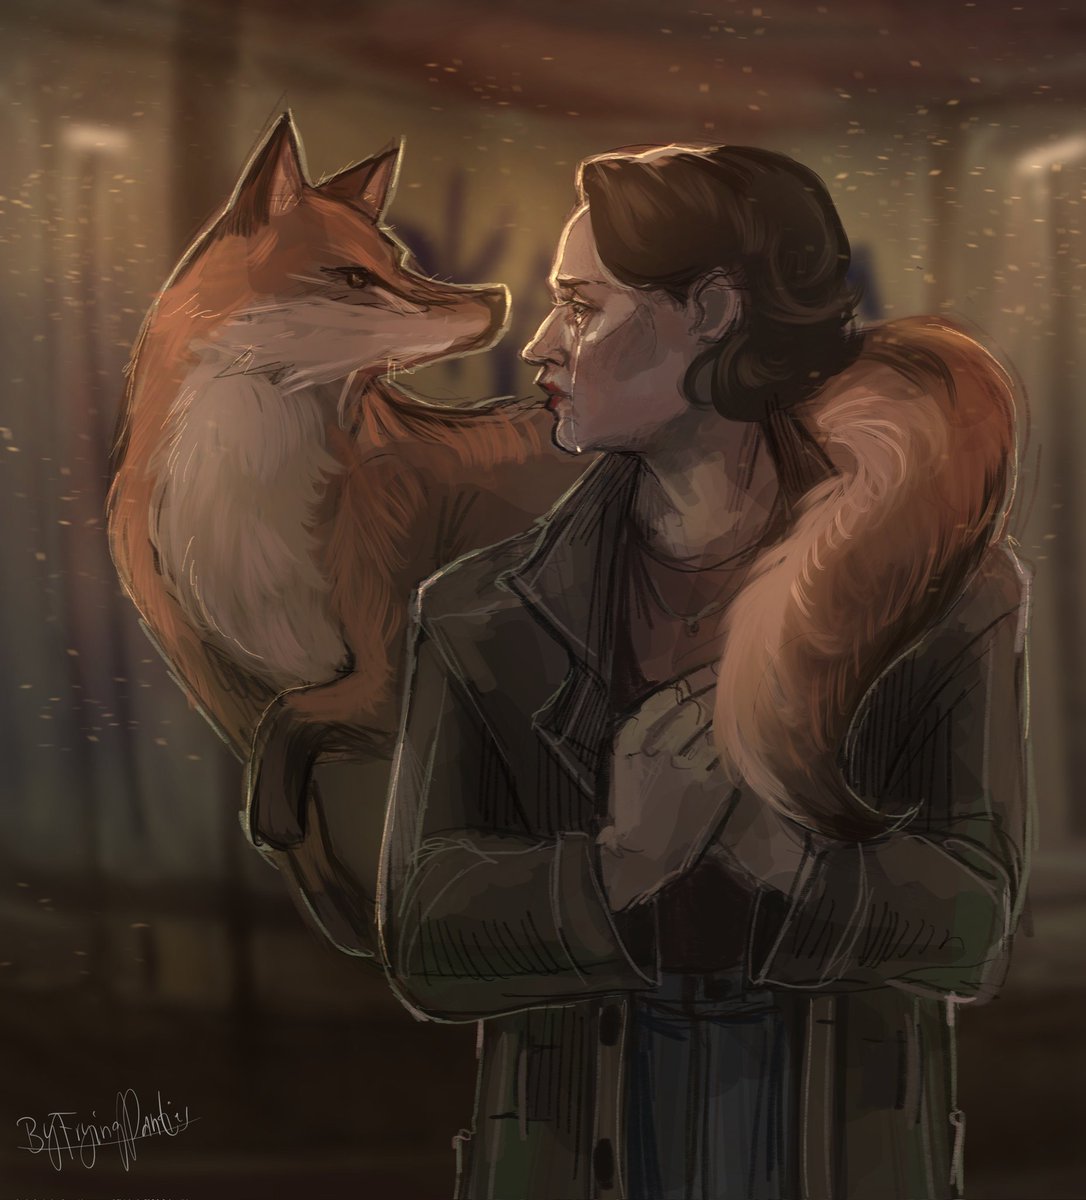 Had my own IRL parallel to Fleabag (positive, though) today and my very human response to such emotion was to draw!

#fleabag #phoebewallerbridge #fox #art #artist #digitalart #illustration